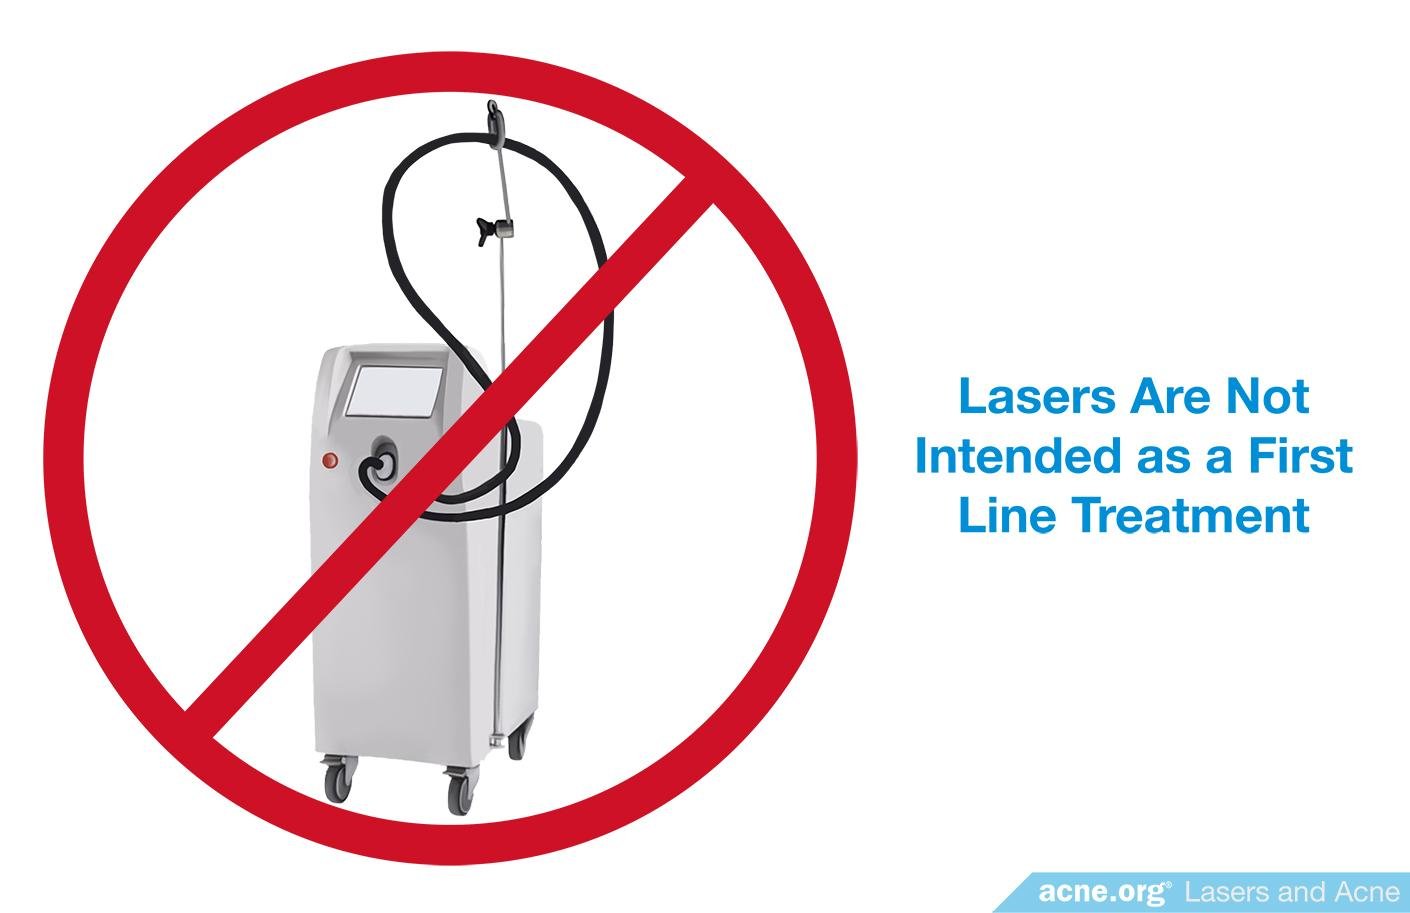 Lasers Are Not Intended as a First Line Treatment